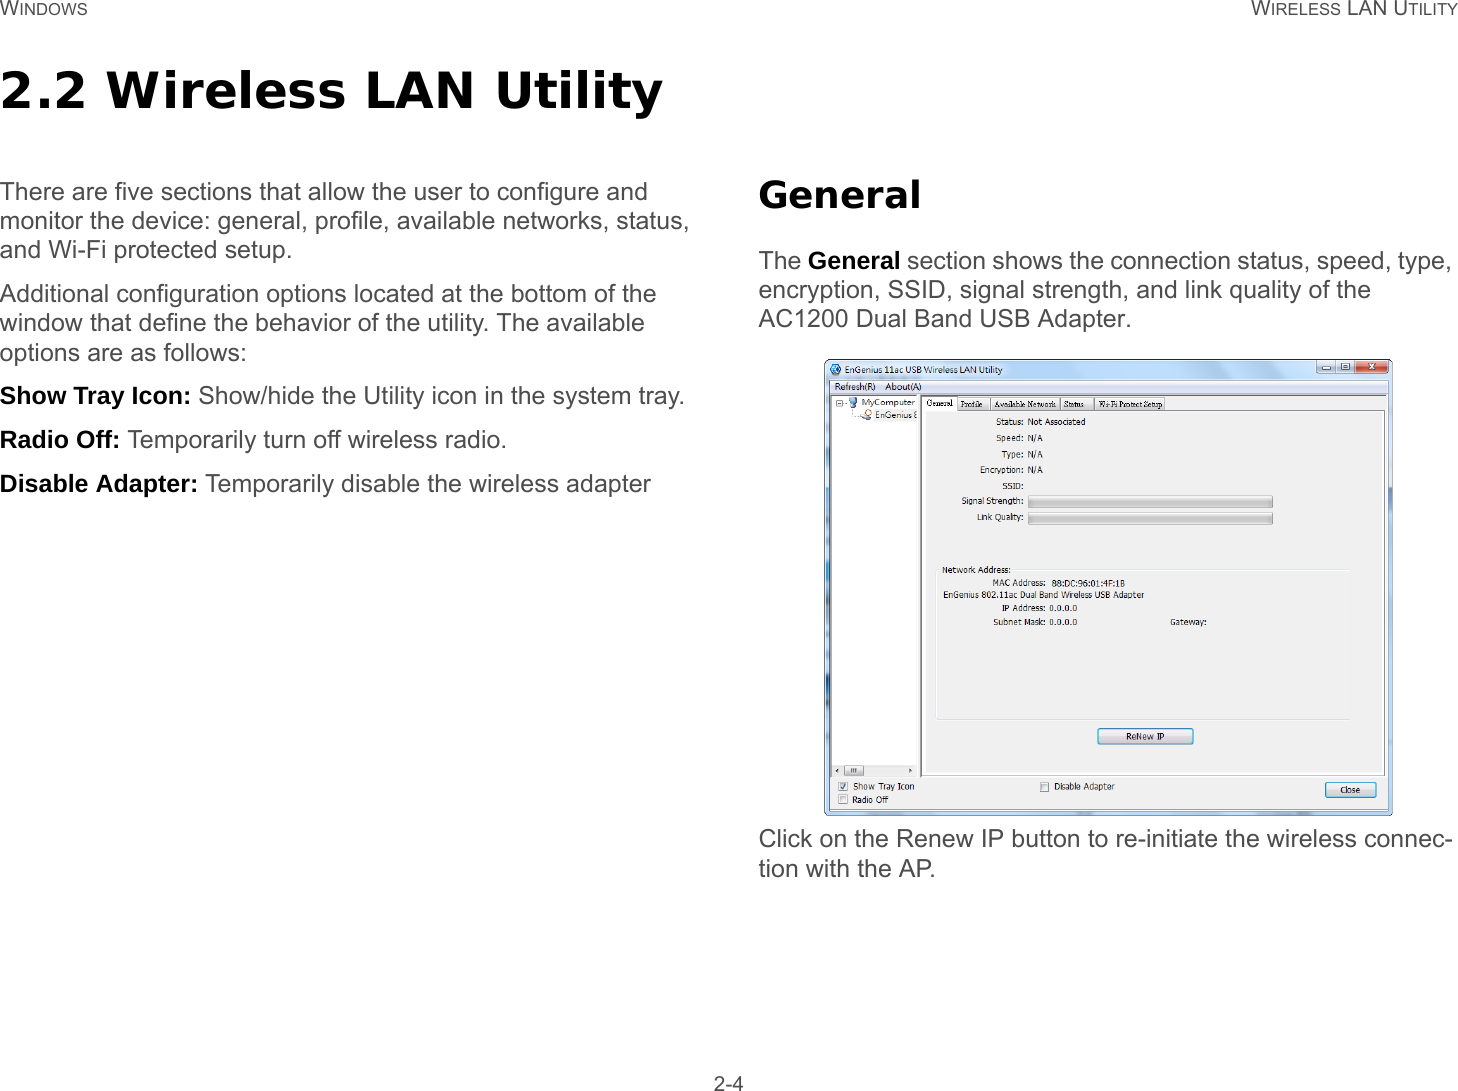 WINDOWS WIRELESS LAN UTILITY 2-42.2 Wireless LAN UtilityThere are five sections that allow the user to configure and monitor the device: general, profile, available networks, status, and Wi-Fi protected setup.Additional configuration options located at the bottom of the window that define the behavior of the utility. The available options are as follows:Show Tray Icon: Show/hide the Utility icon in the system tray.Radio Off: Temporarily turn off wireless radio.Disable Adapter: Temporarily disable the wireless adapterGeneralThe General section shows the connection status, speed, type, encryption, SSID, signal strength, and link quality of the AC1200 Dual Band USB Adapter.Click on the Renew IP button to re-initiate the wireless connec-tion with the AP.